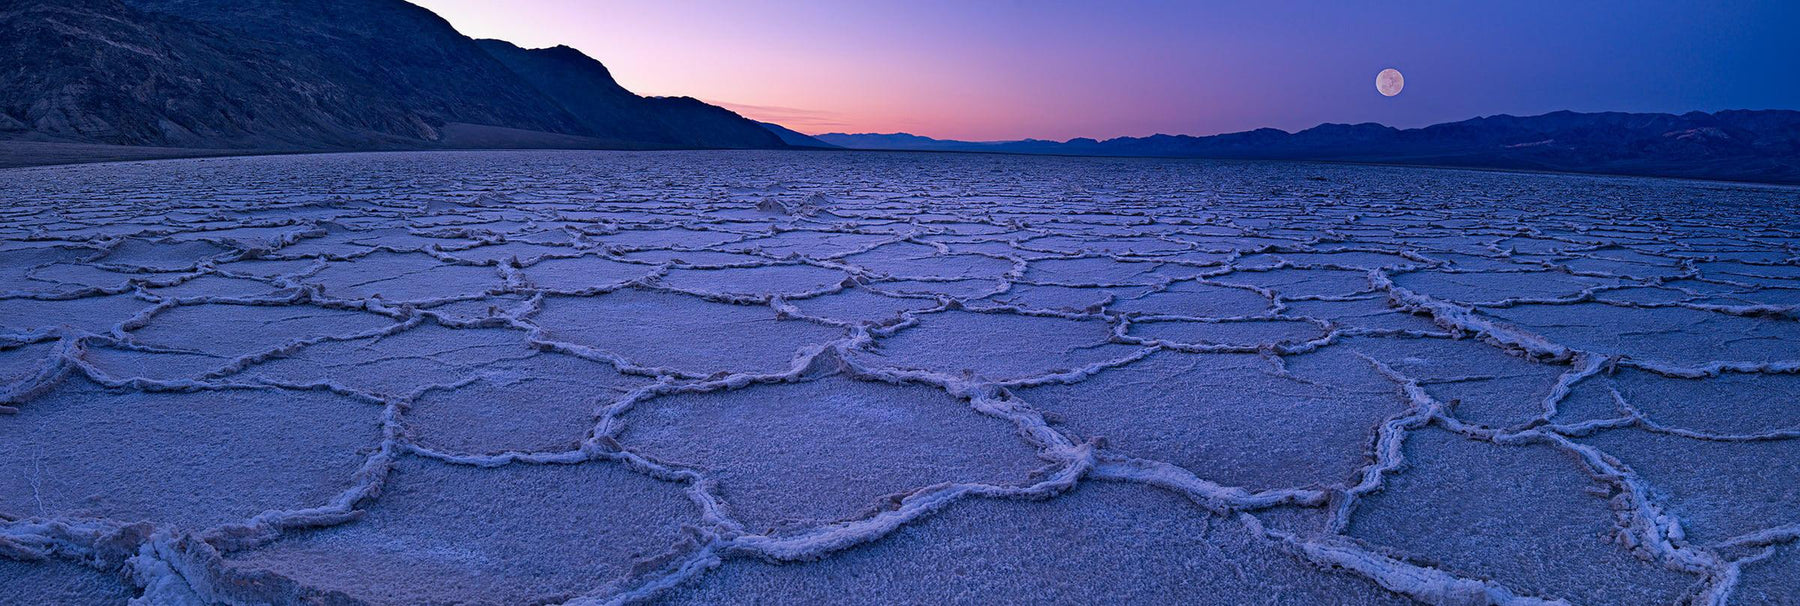 Full moon over the salt flats of Death Valley California at sunrise